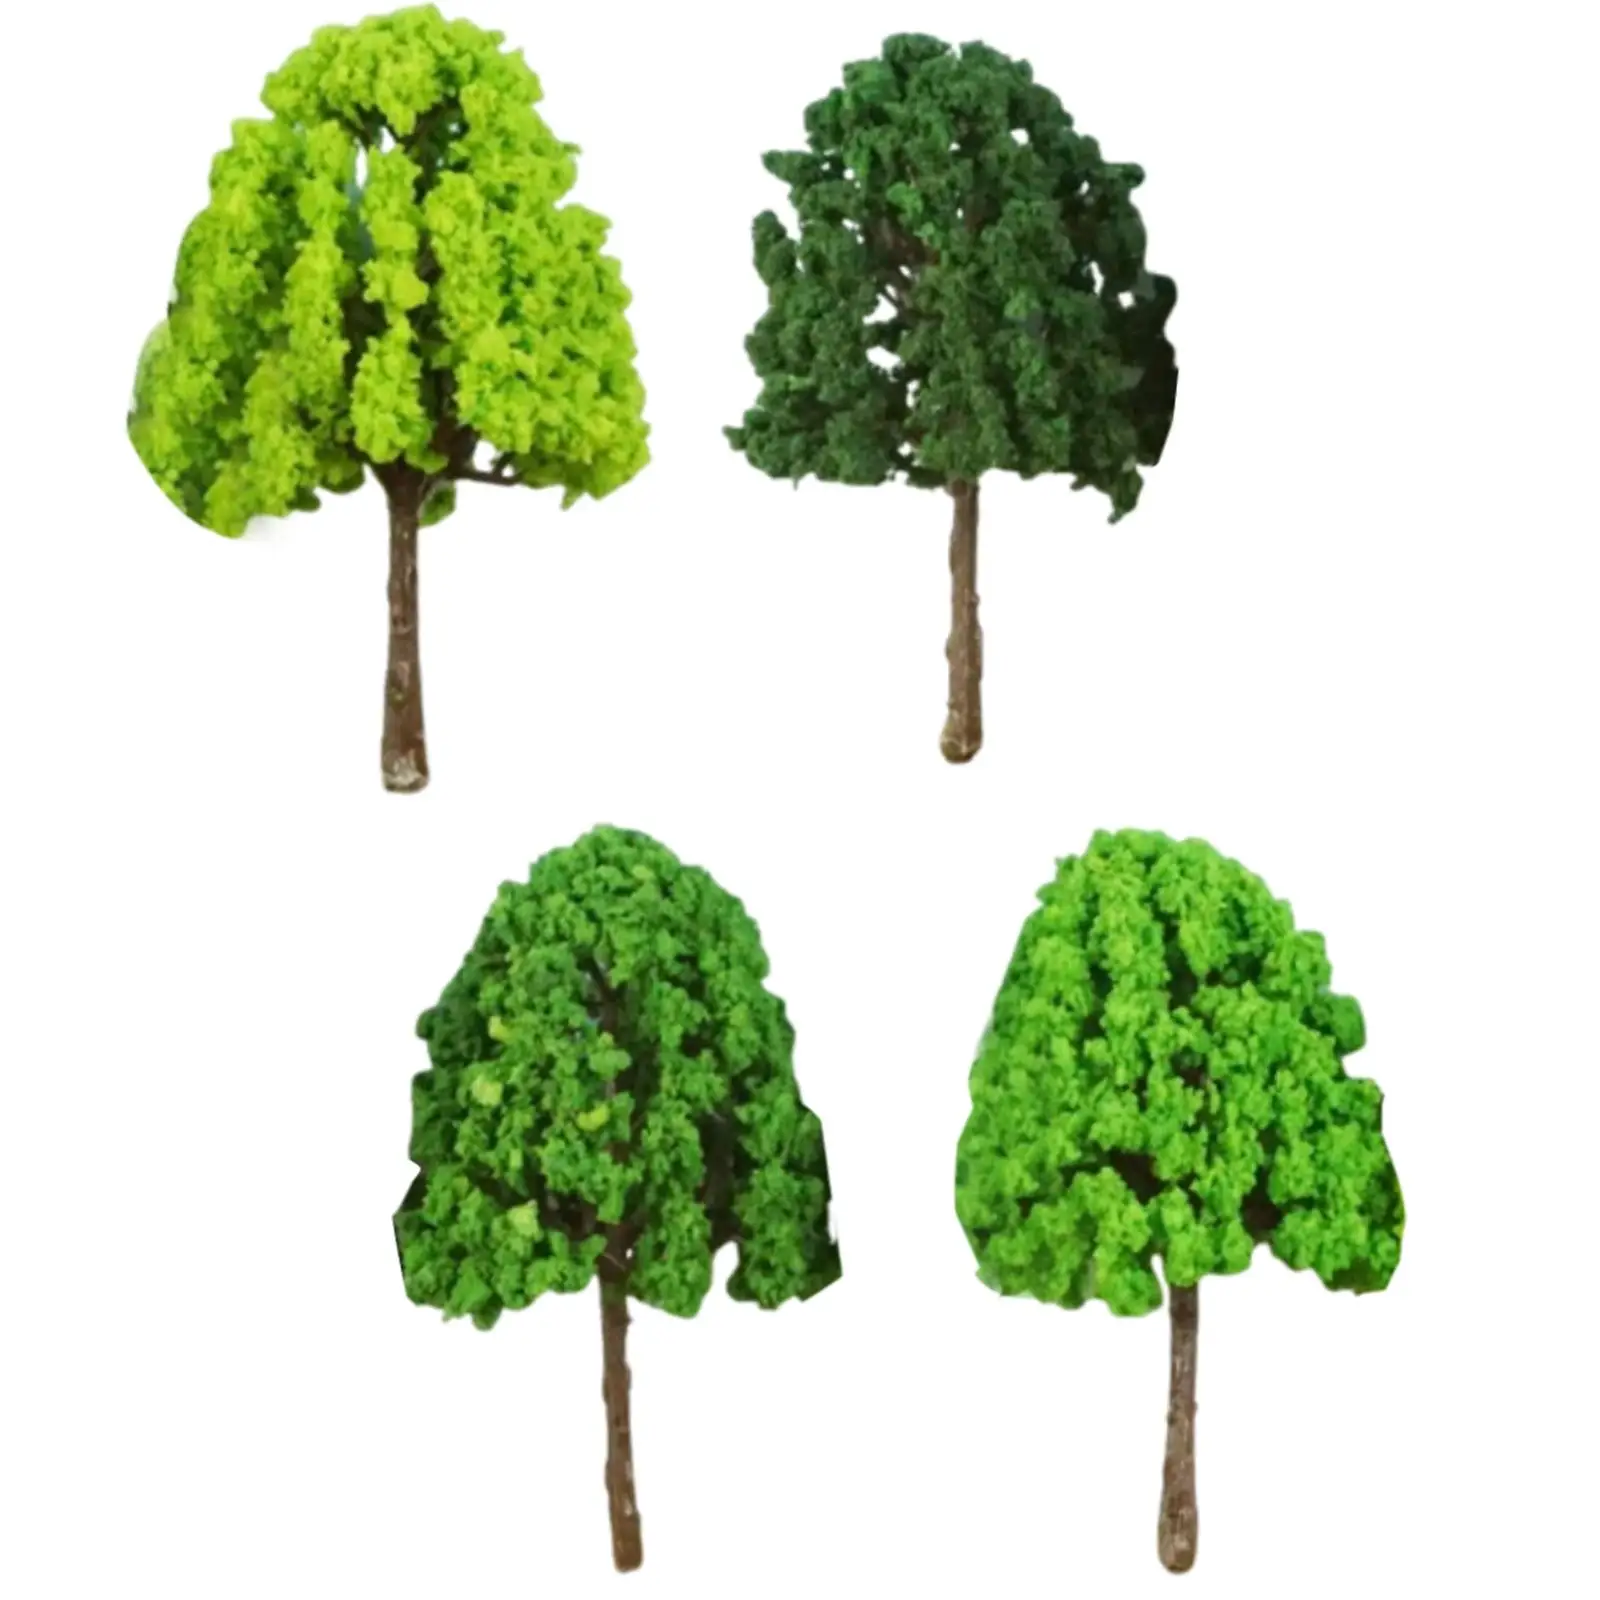 

50 Pieces Model Trees Diorama Supplies Train Scenery Architecture Trees Miniature Trees for Railway Layout, Dollhouse